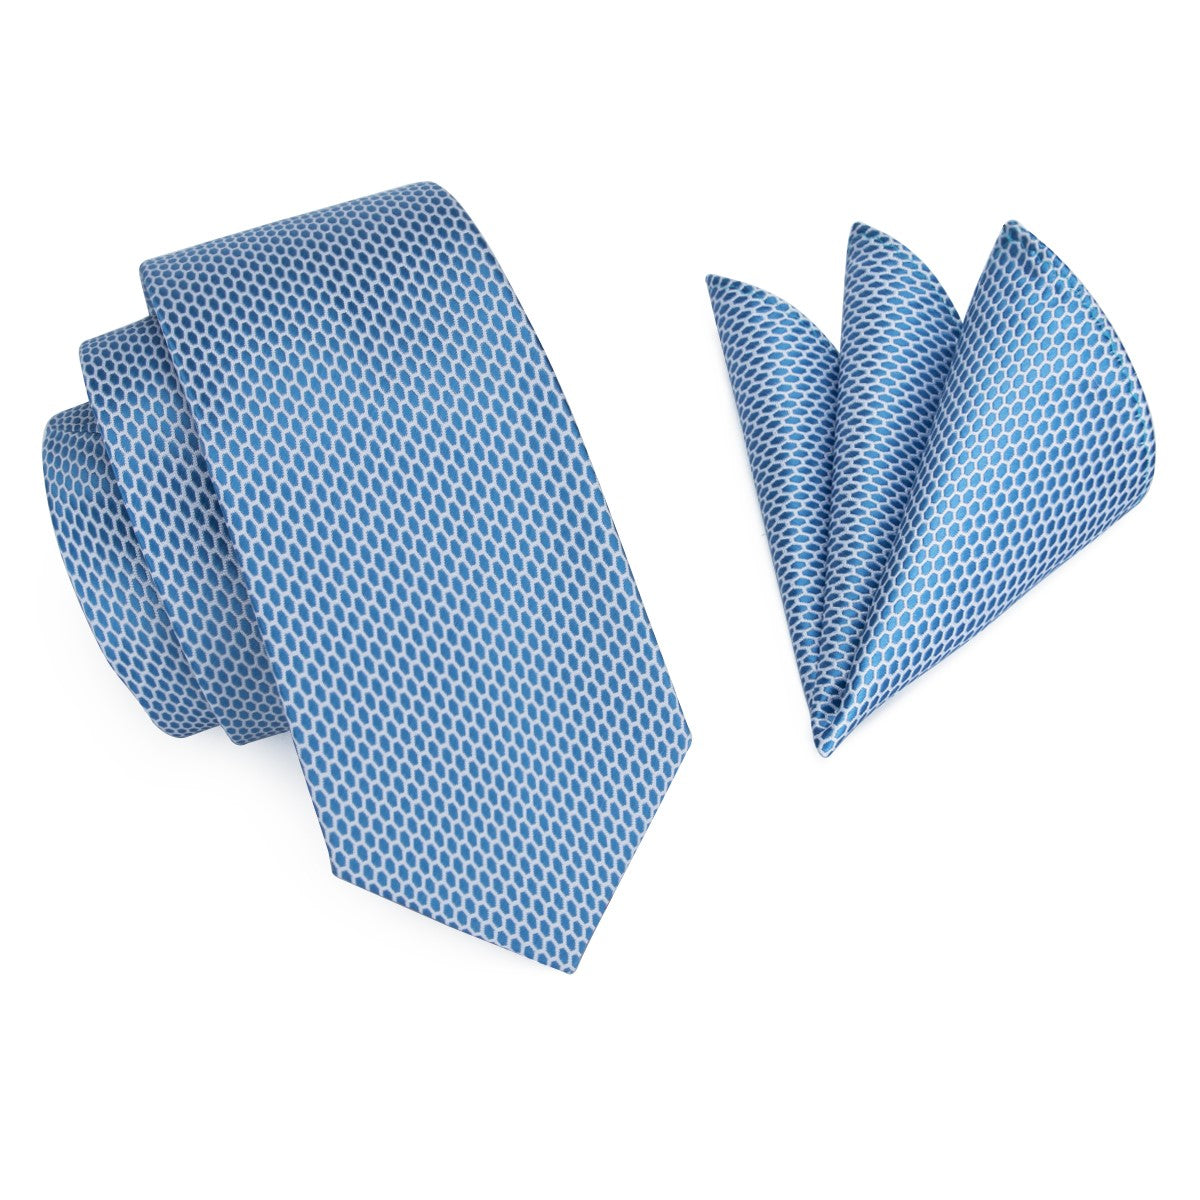 Alt View: A Light Blue, White Geometric Oval Shaped Pattern Silk Necktie, Matching Pocket Square